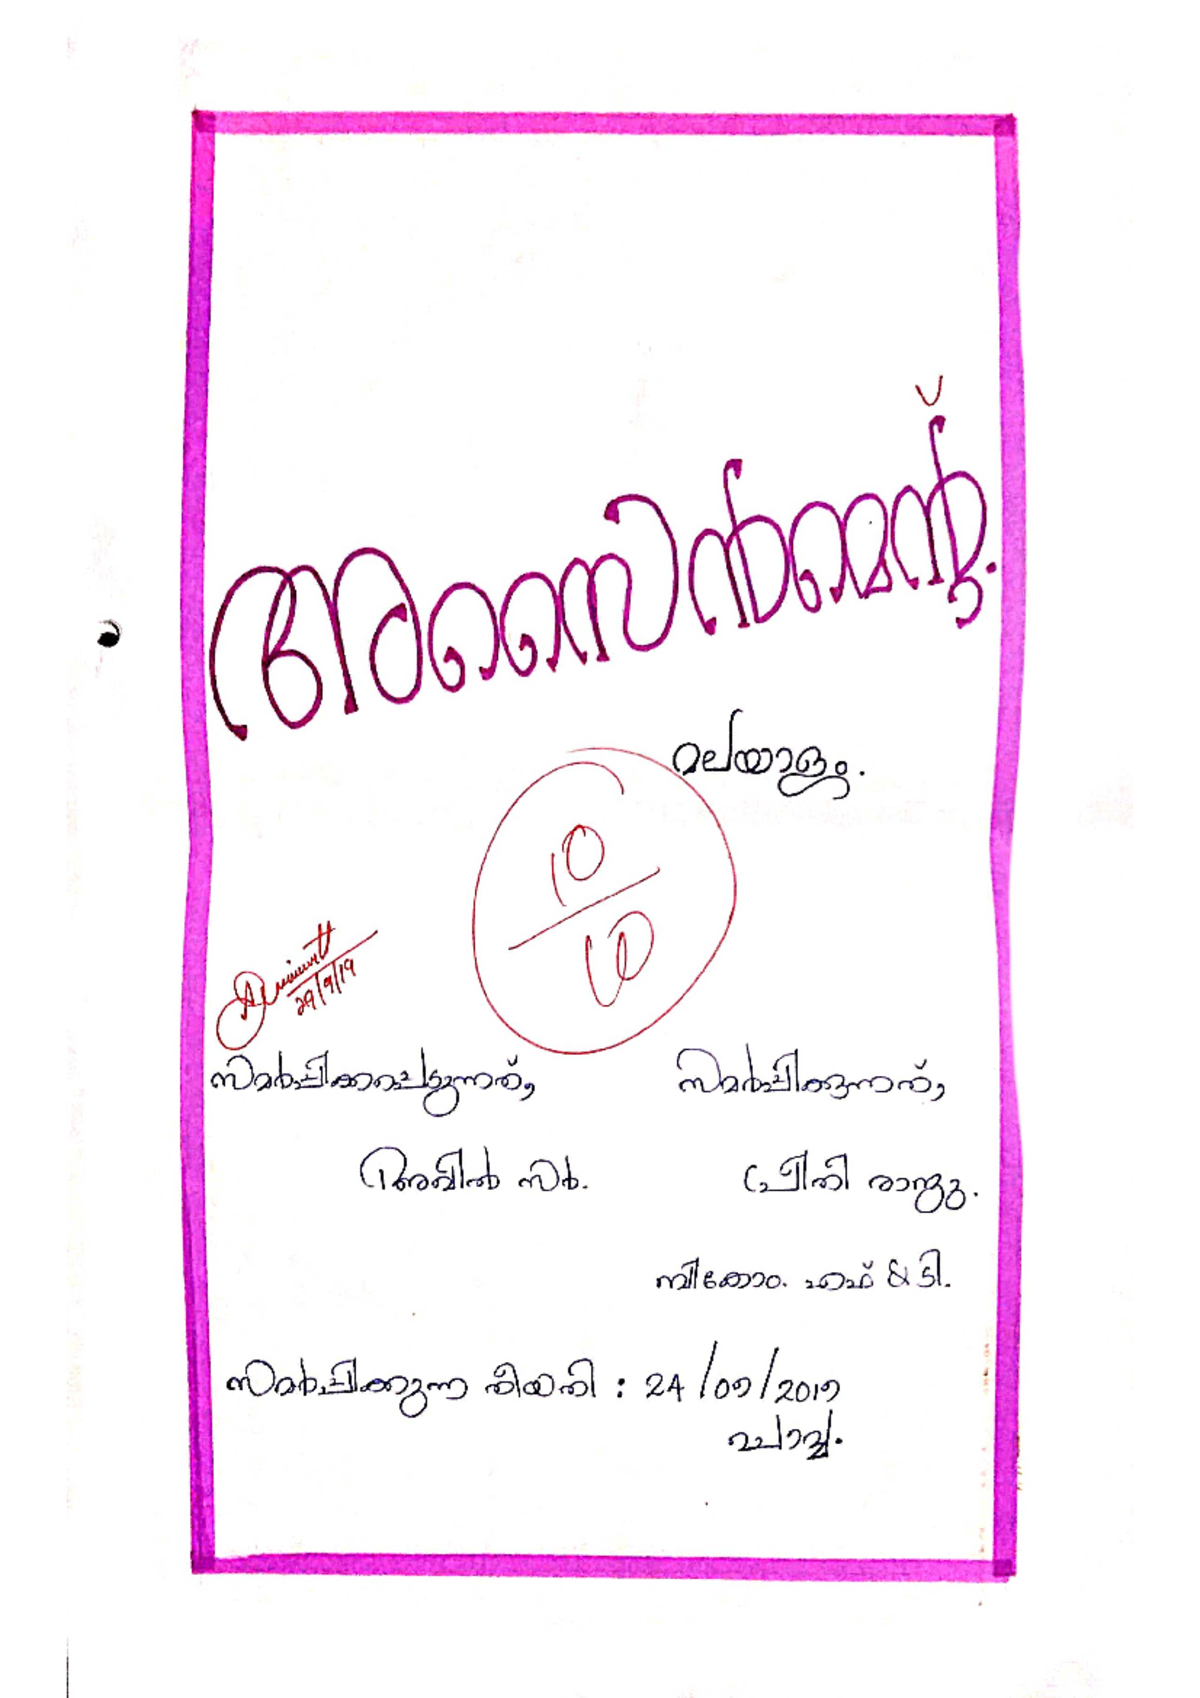 project assignment in malayalam